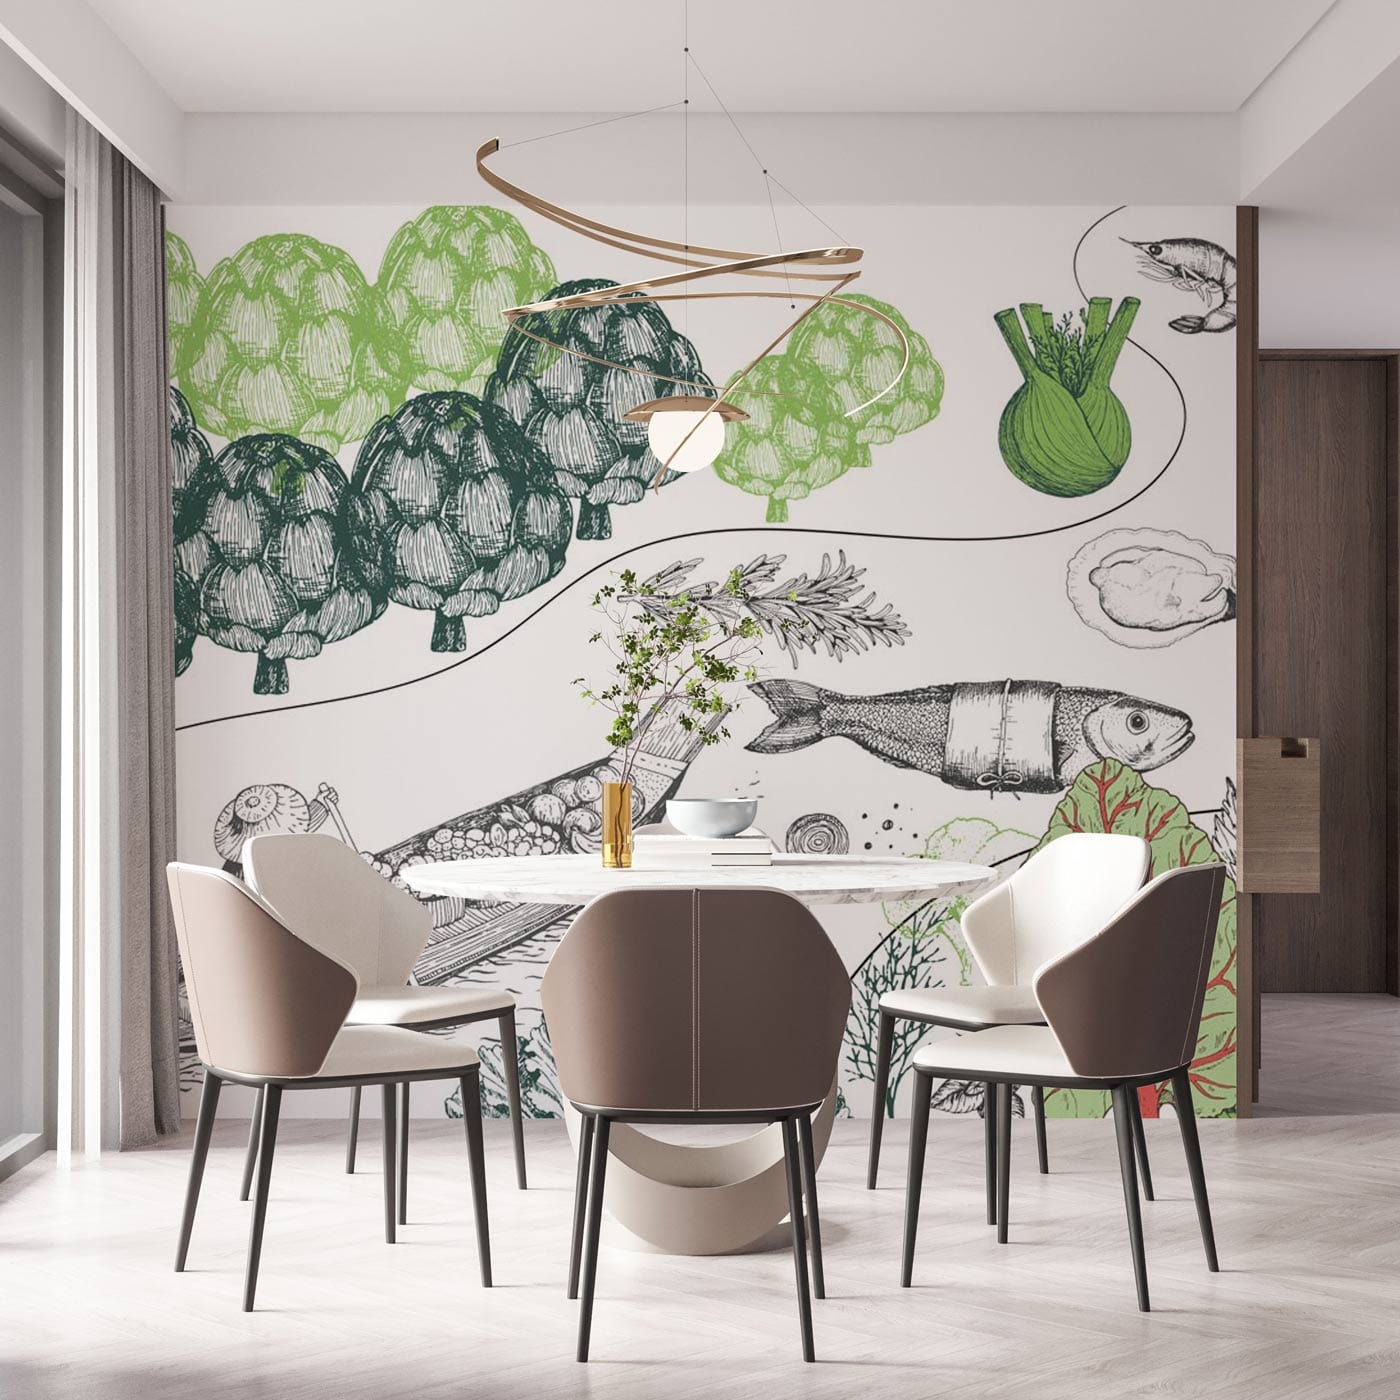 Dining Room Wallpaper Mural Featuring Fish and a River